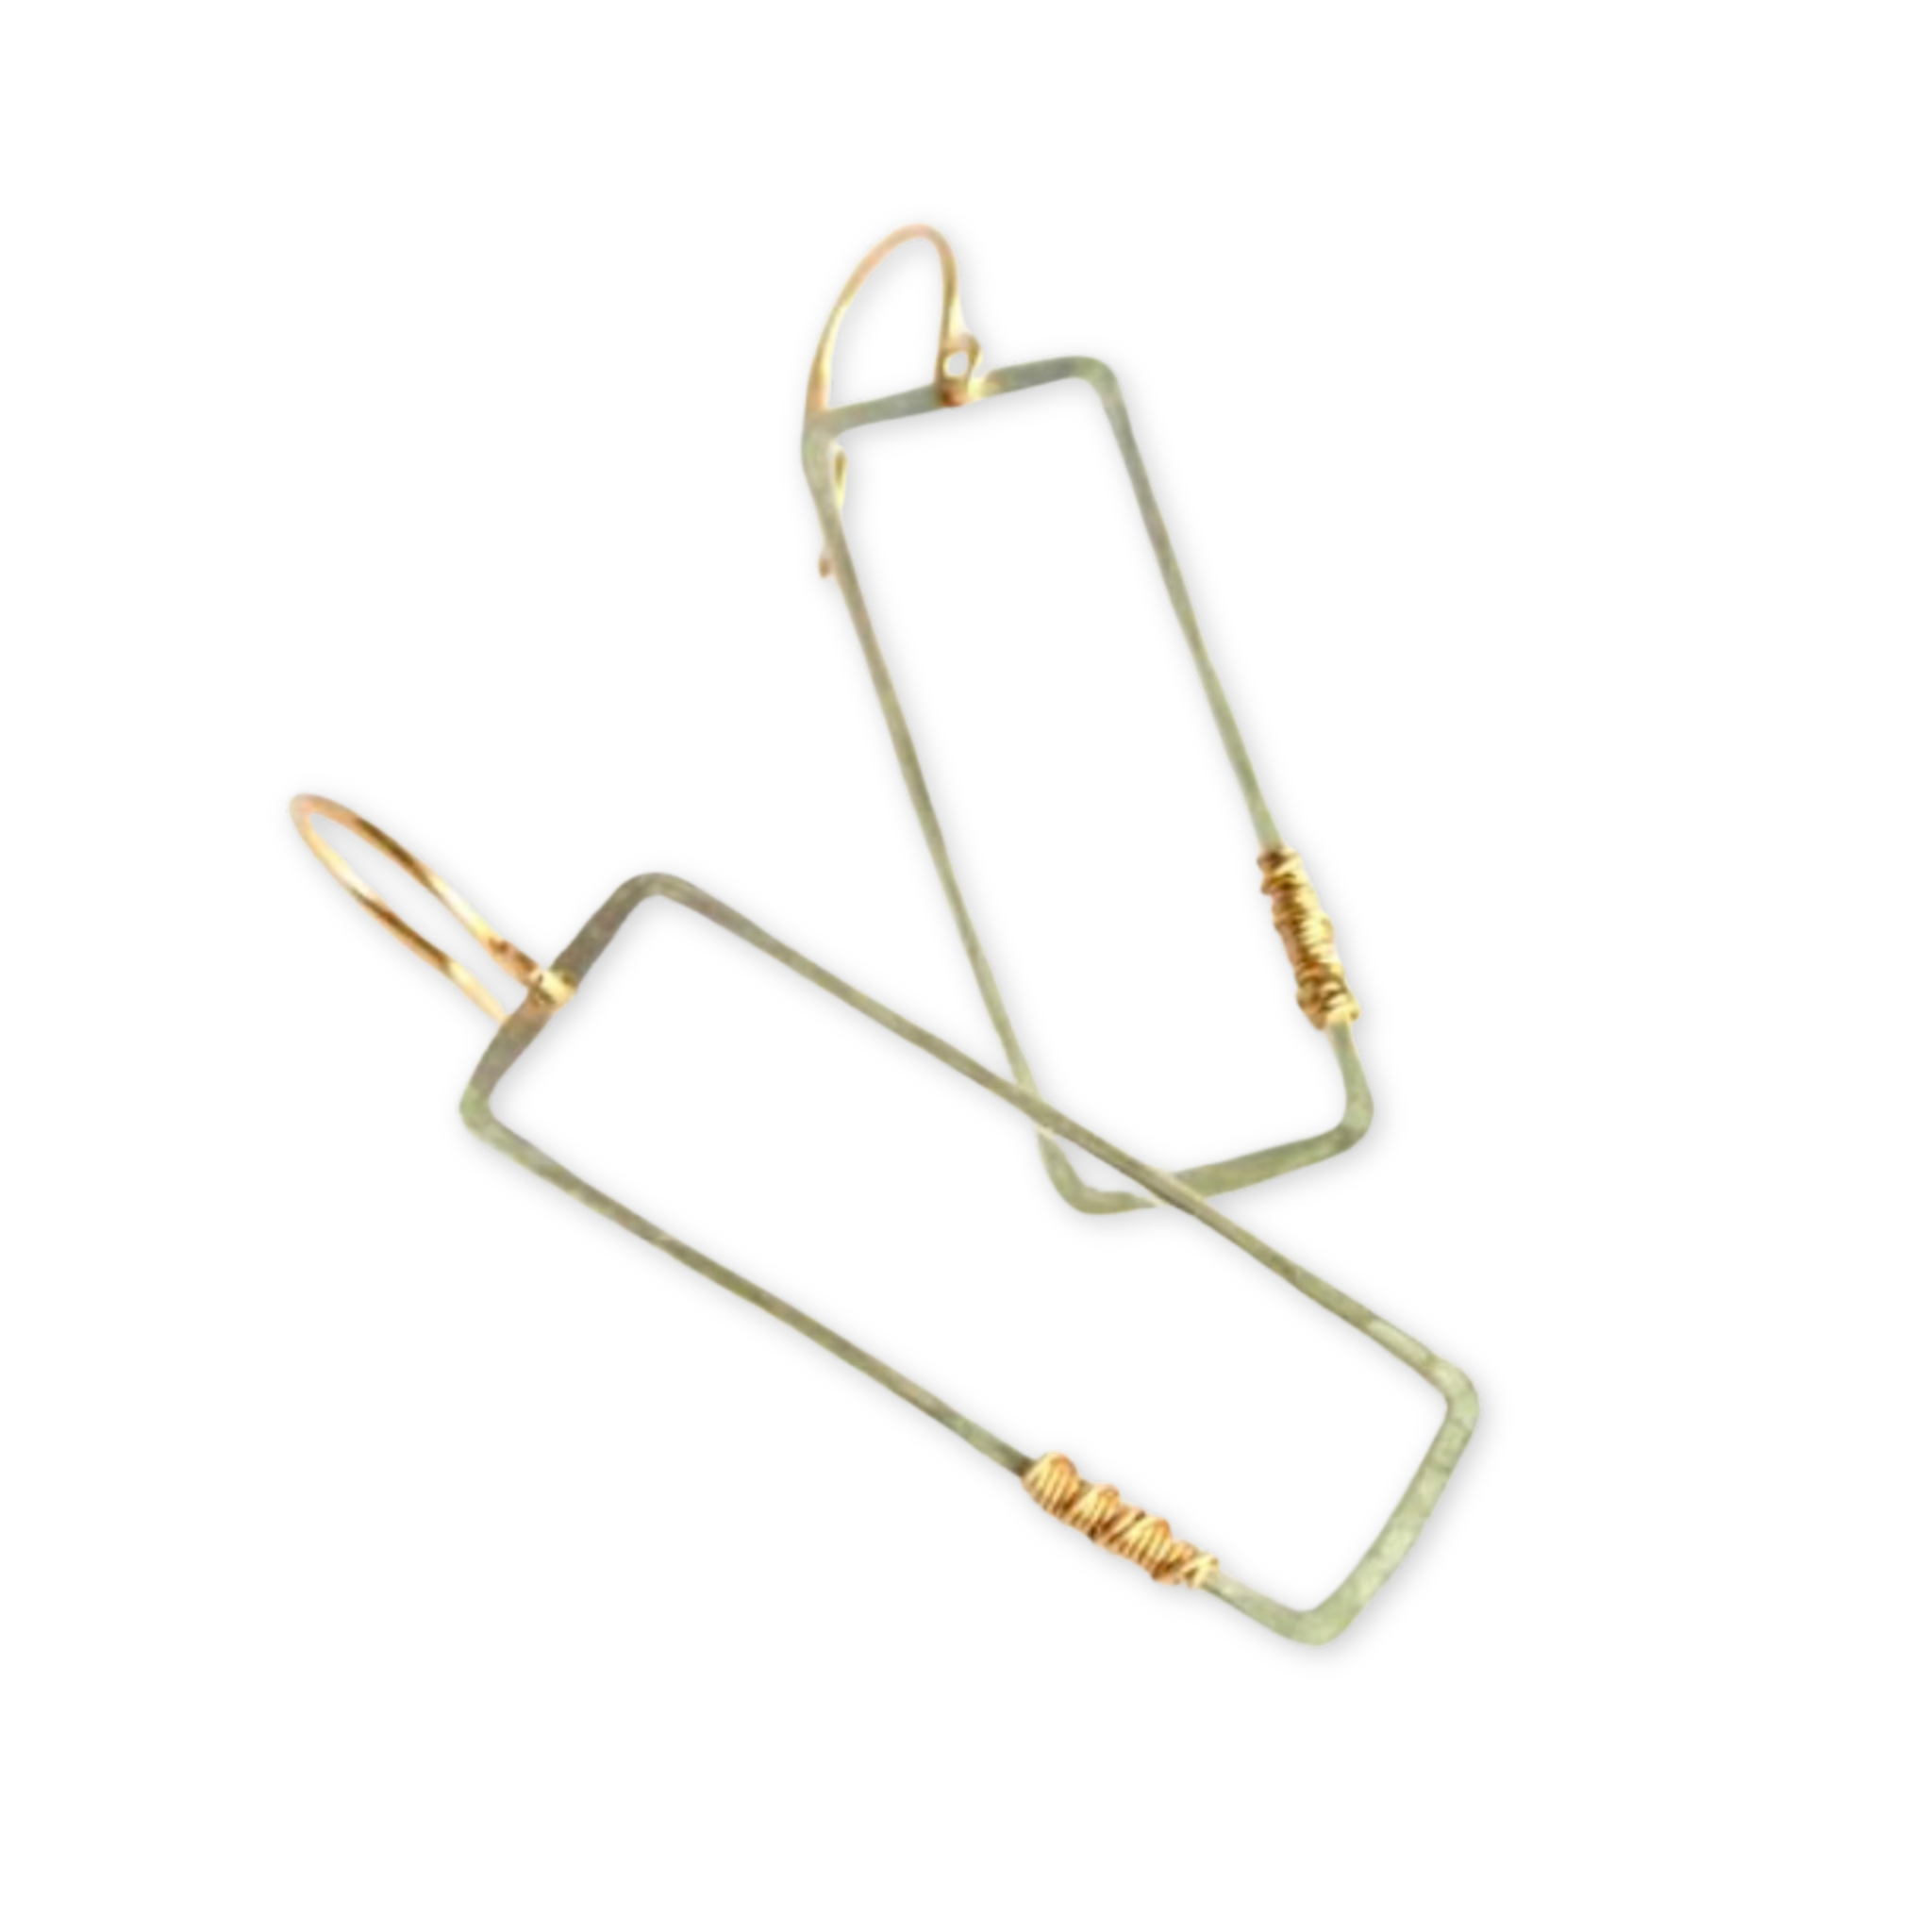 earrings with hanging hammered rectangle hoops with a small wire wrapped section